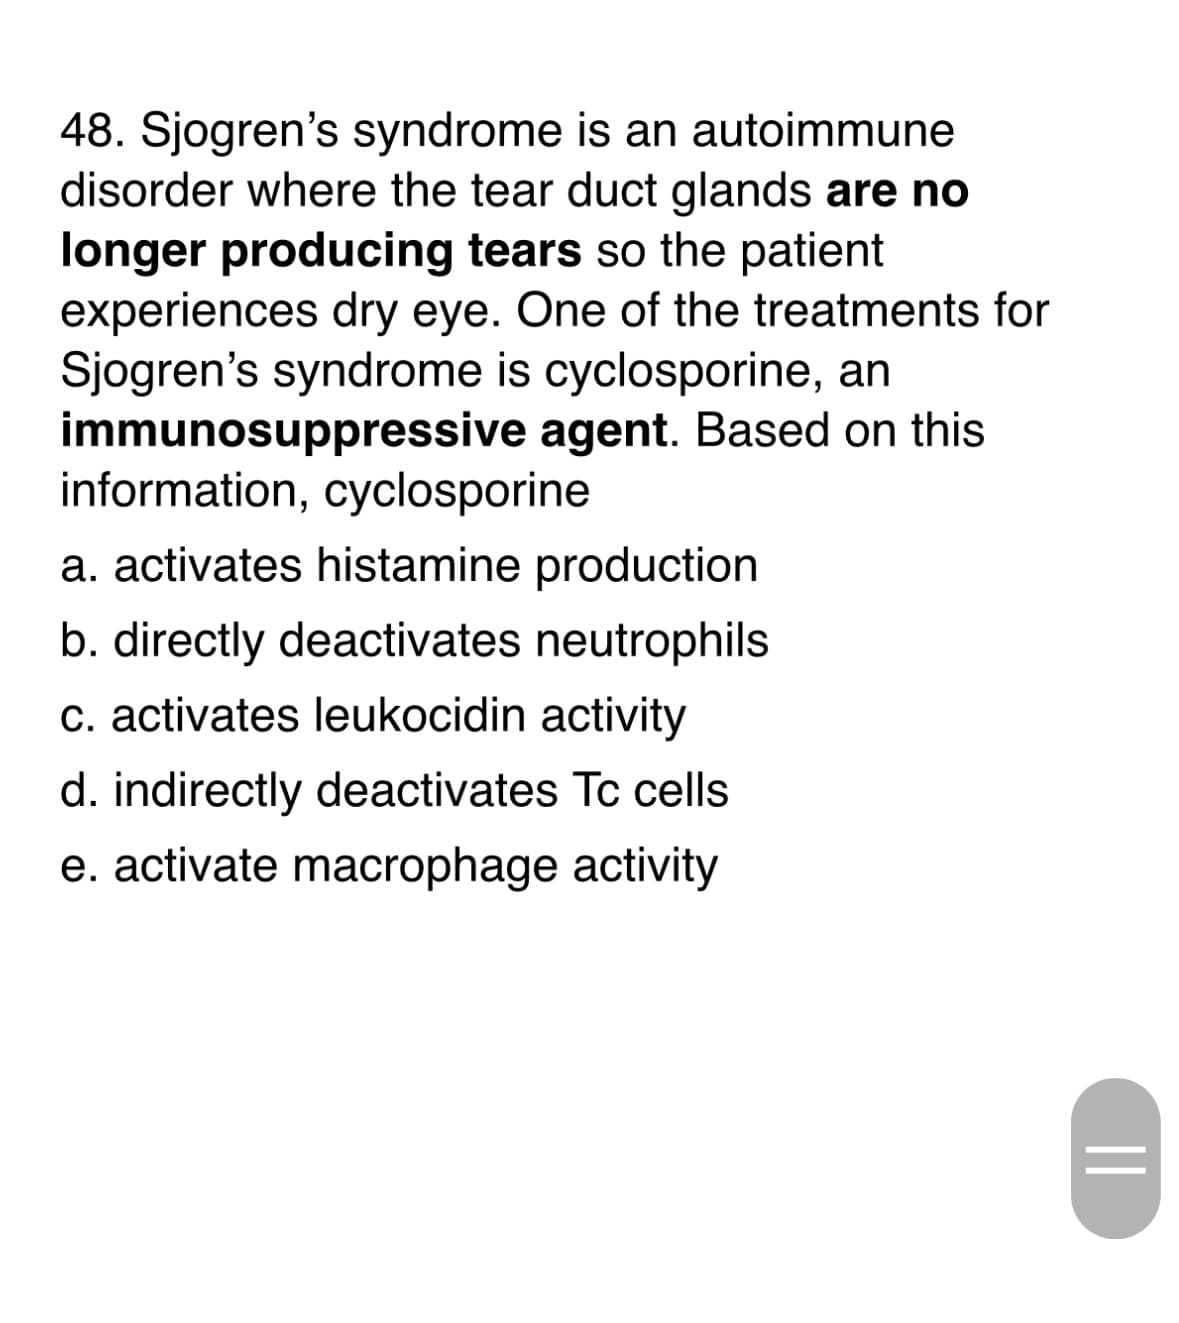 48. Sjogren's syndrome is an autoimmune
disorder where the tear duct glands are no
longer producing tears so the patient
experiences dry eye. One of the treatments for
Sjogren's syndrome is cyclosporine, an
immunosuppressive
information, cyclosporine
agent. Based on this
a. activates histamine production
b. directly deactivates neutrophils
c. activates leukocidin activity
d. indirectly deactivates Tc cells
e. activate macrophage activity
||